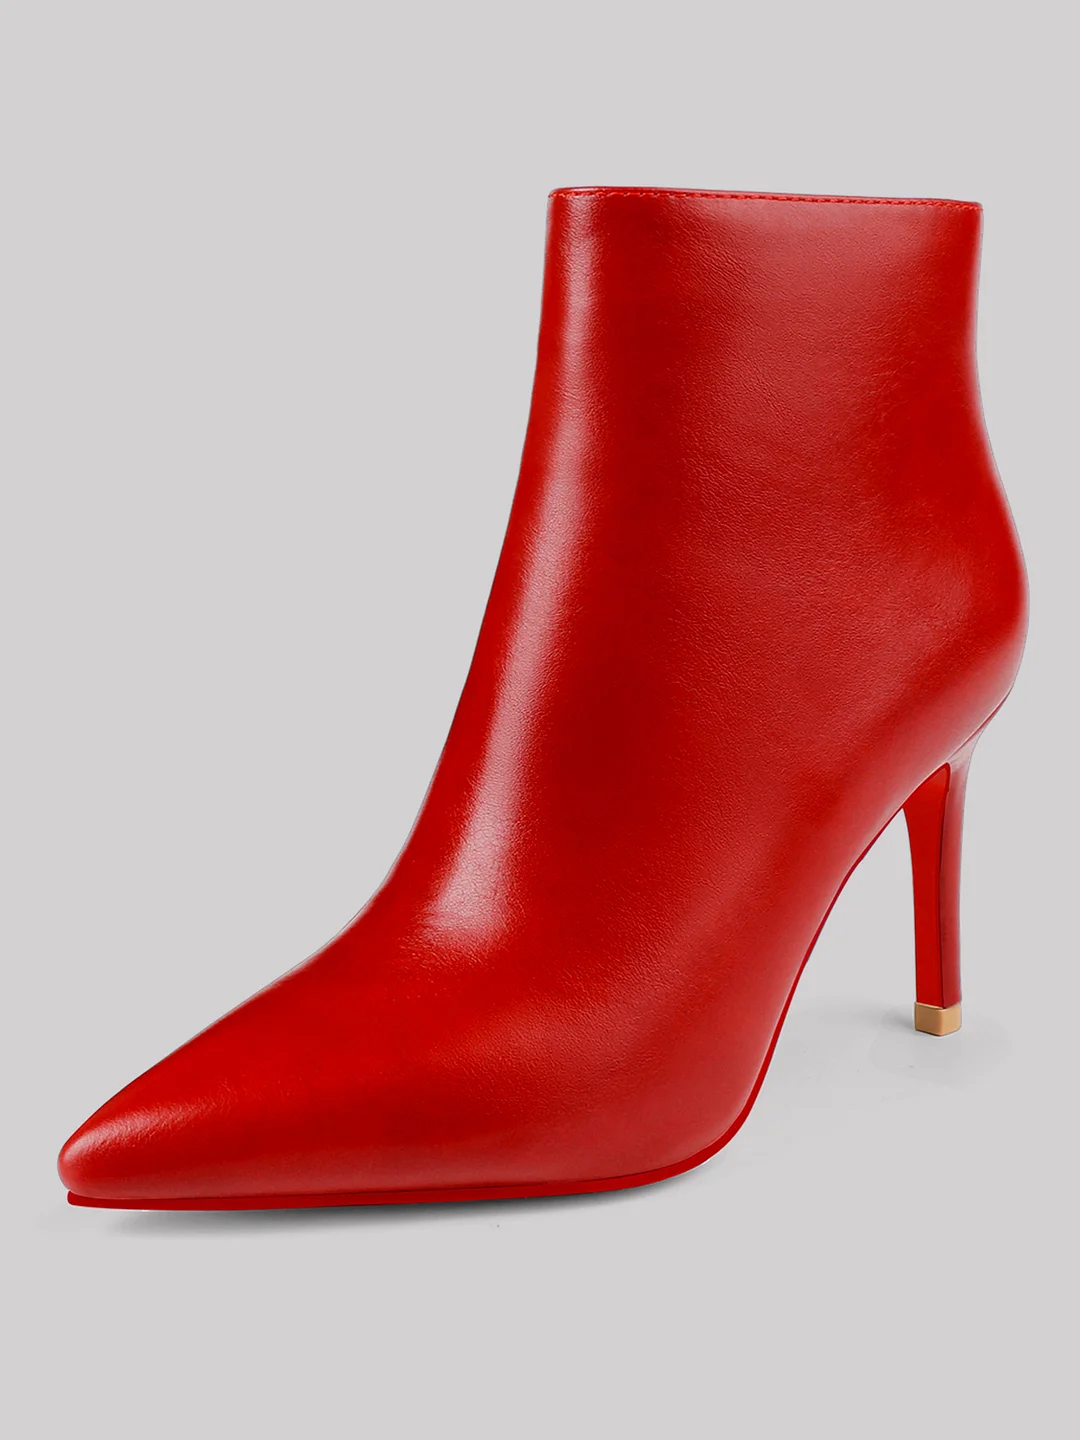 3.54" Miseyes Women's Ankle Boots Middle Heel Pointed Toe Stiletto Red Bottom Boots